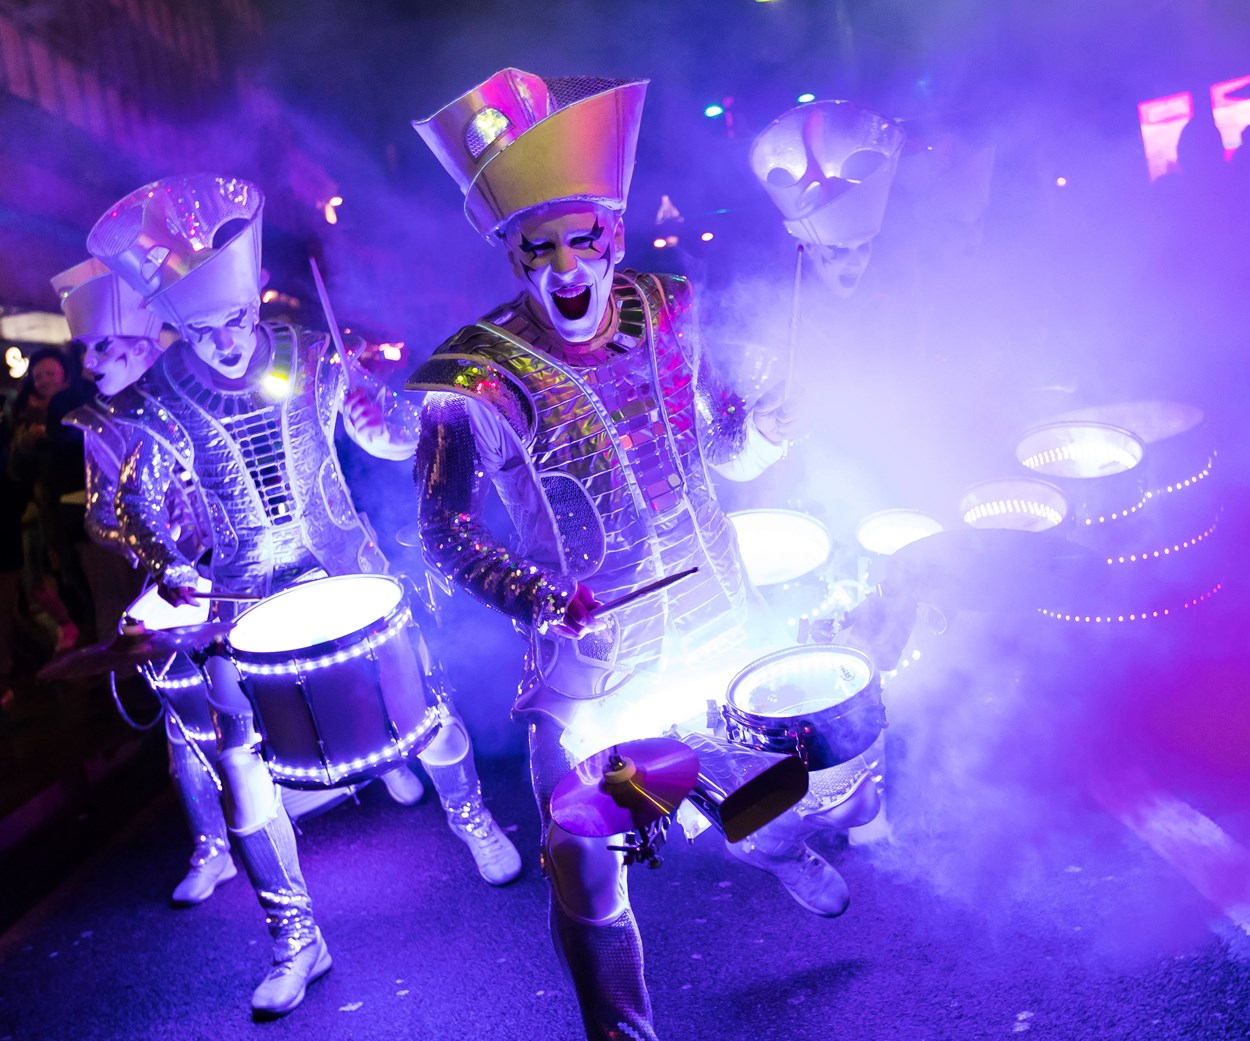 Light Night Leeds 2022: The hugely popular Spark drummers will return for Light Night Leeds 2022, performing in the events space at Trinity Leeds. Image credit Aireborne Lens.